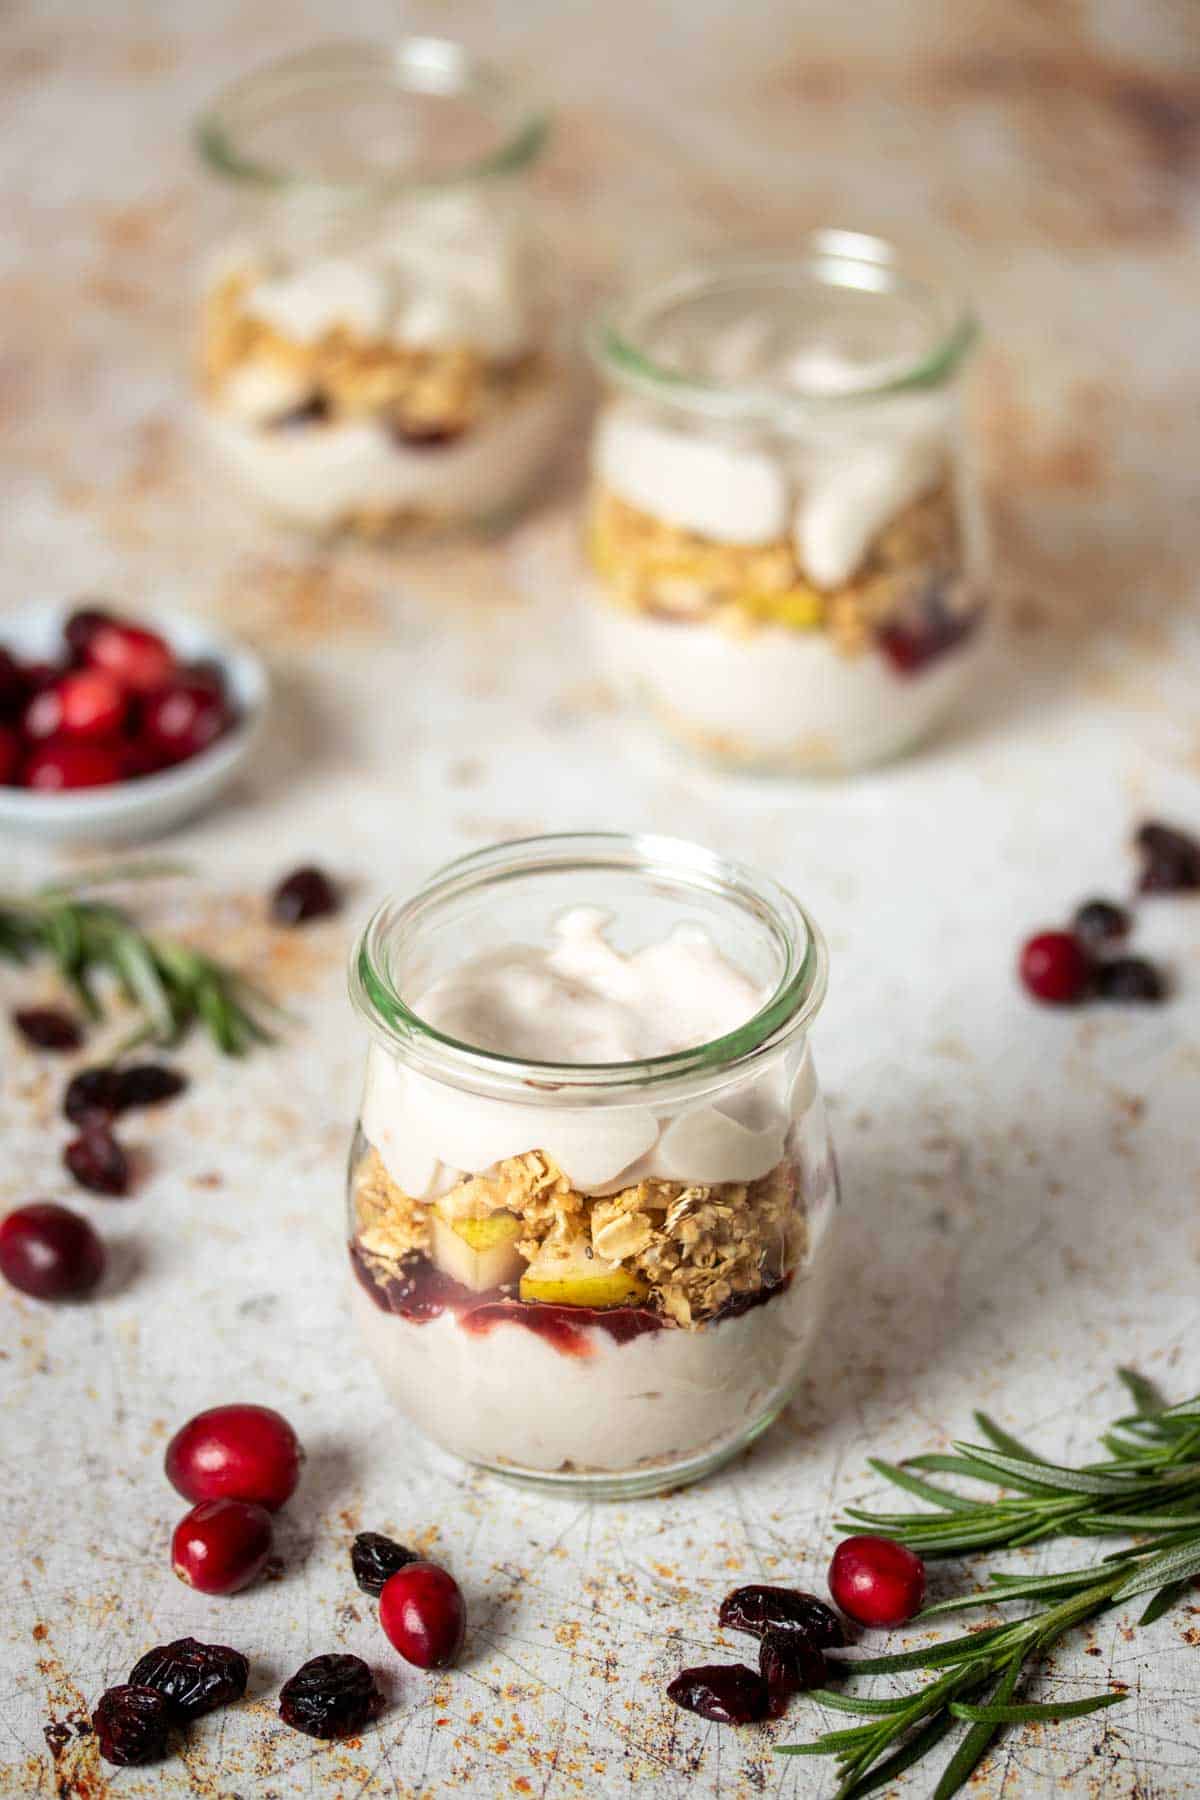 A glass jar layered with yogurt, jelly and granola with two other jars behind it and cranberries and rosemary sprigs on the surface.